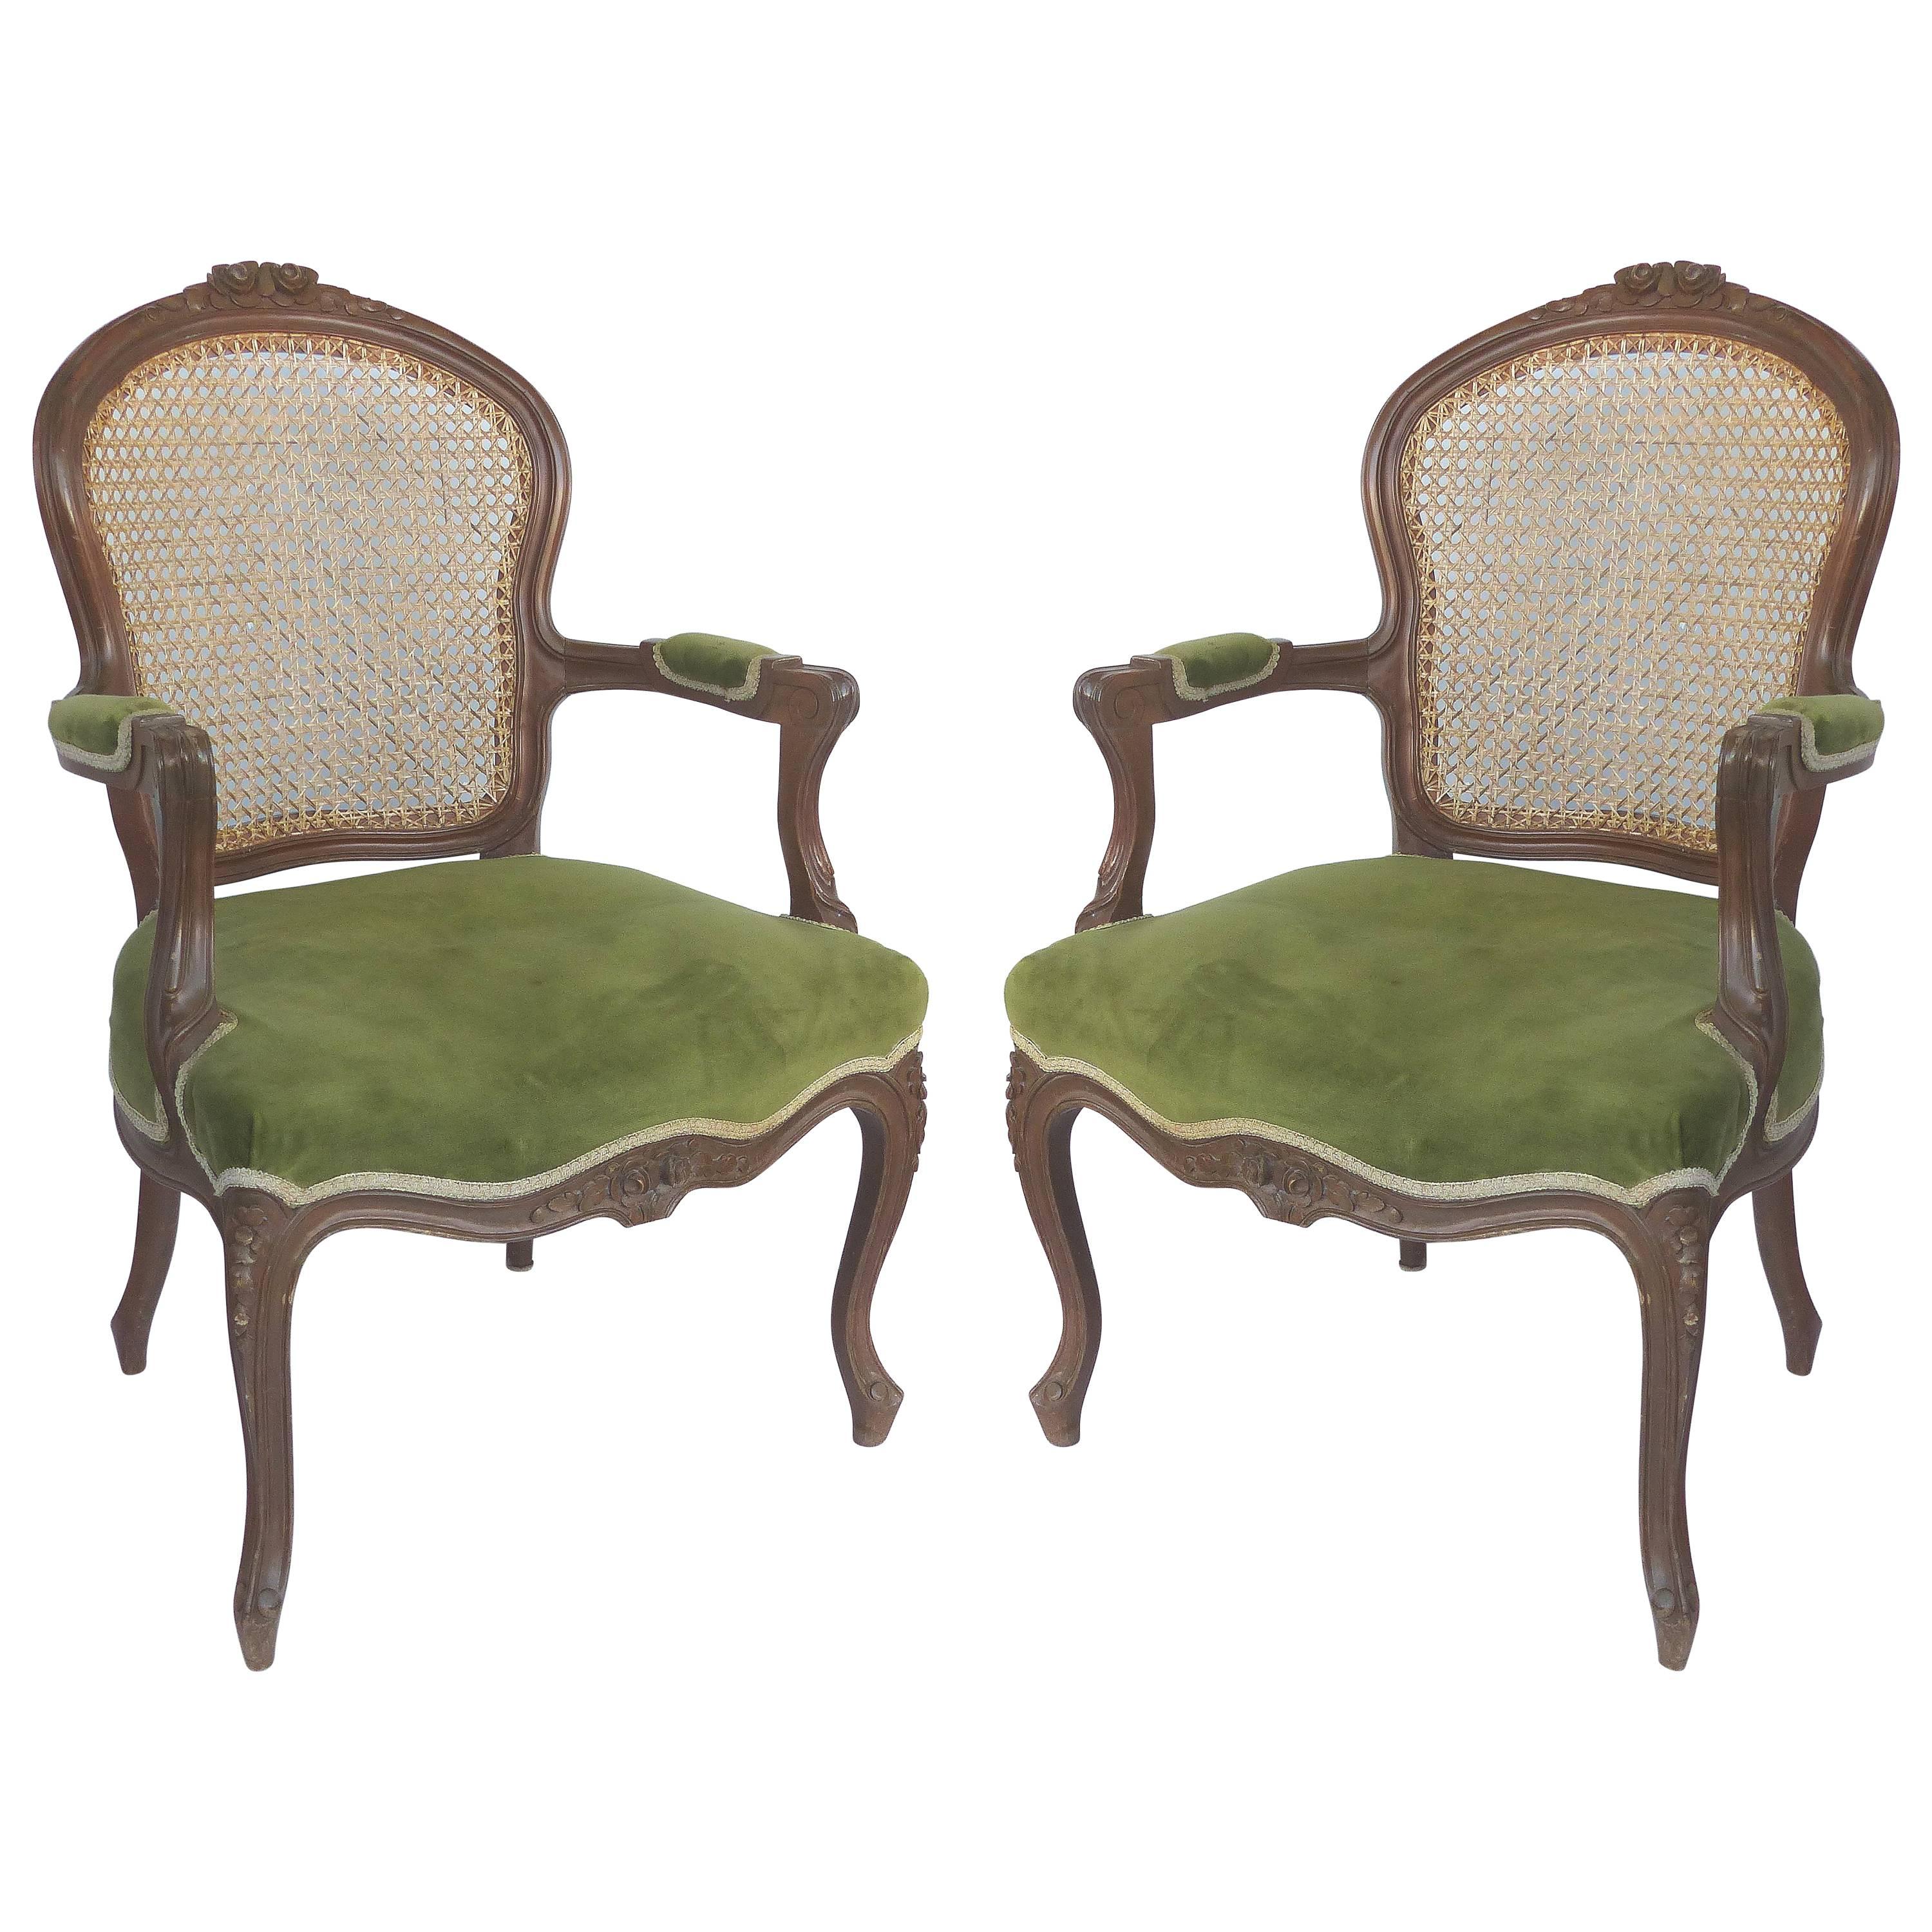 Pair of Hand Caned French Louis XV Style Fauteuil Armchairs with Velvet Mohair